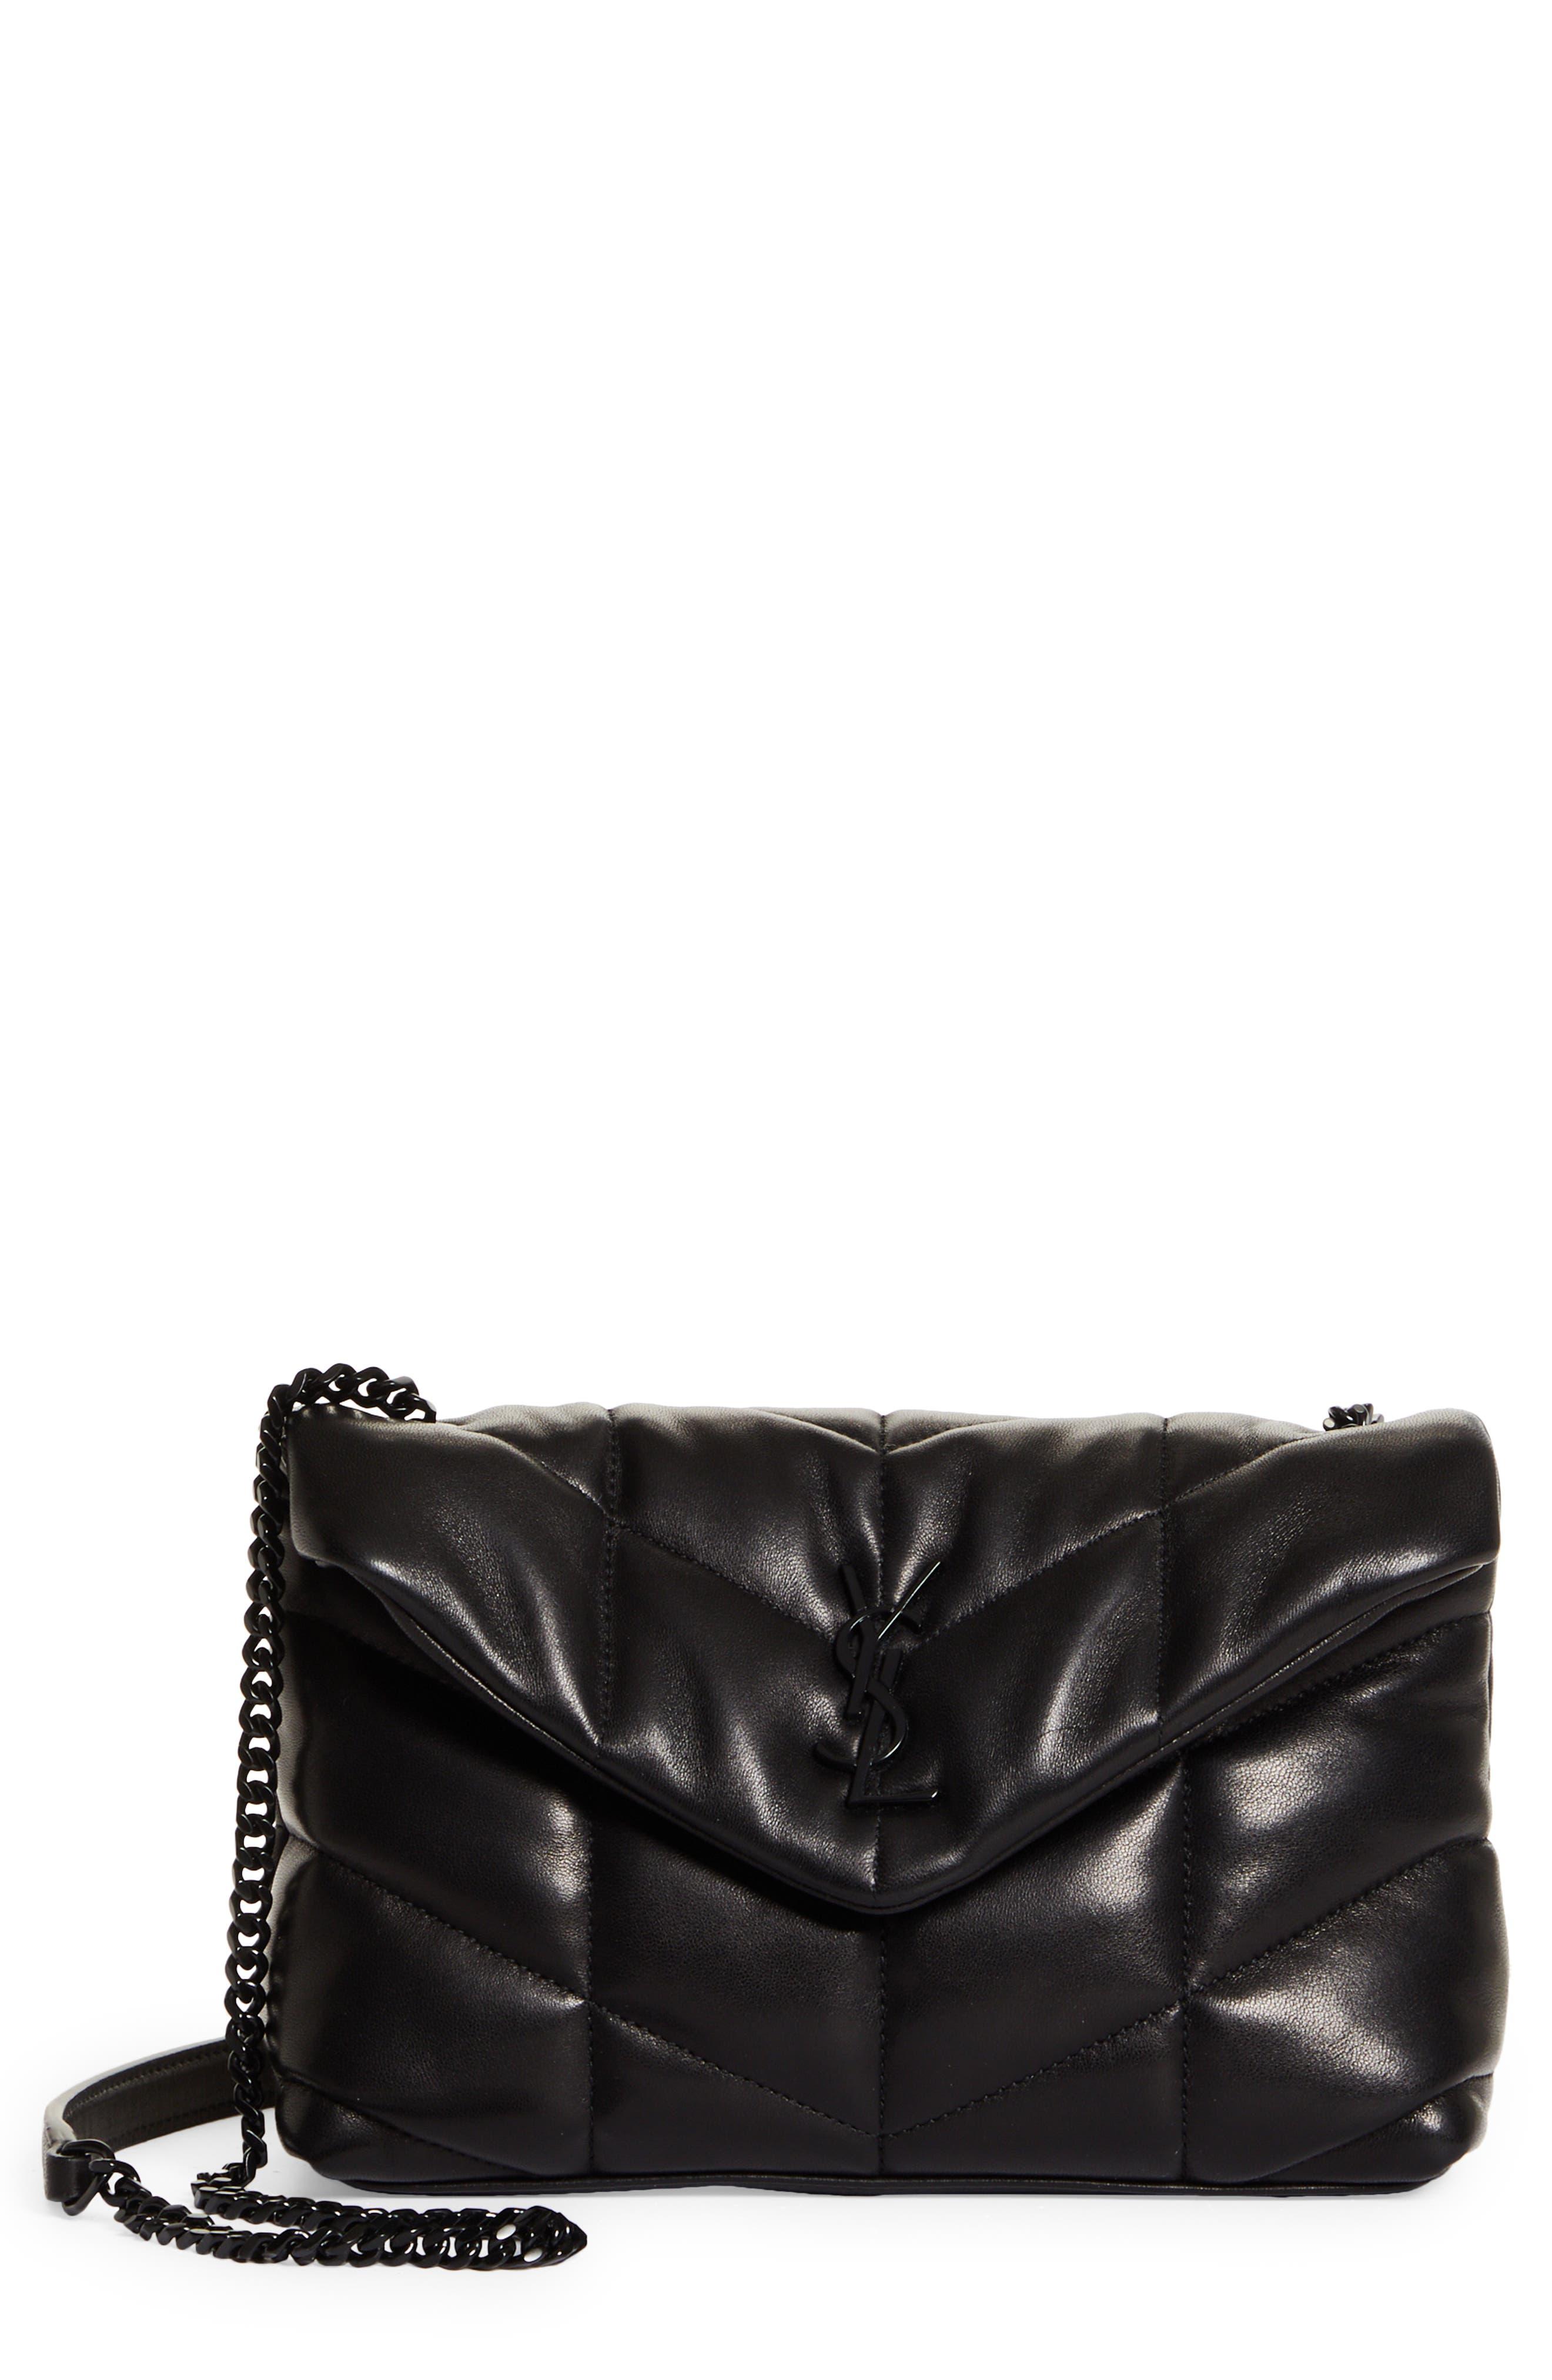 Saint Laurent Toy Loulou Puffer Leather Crossbody Bag in Black | Lyst